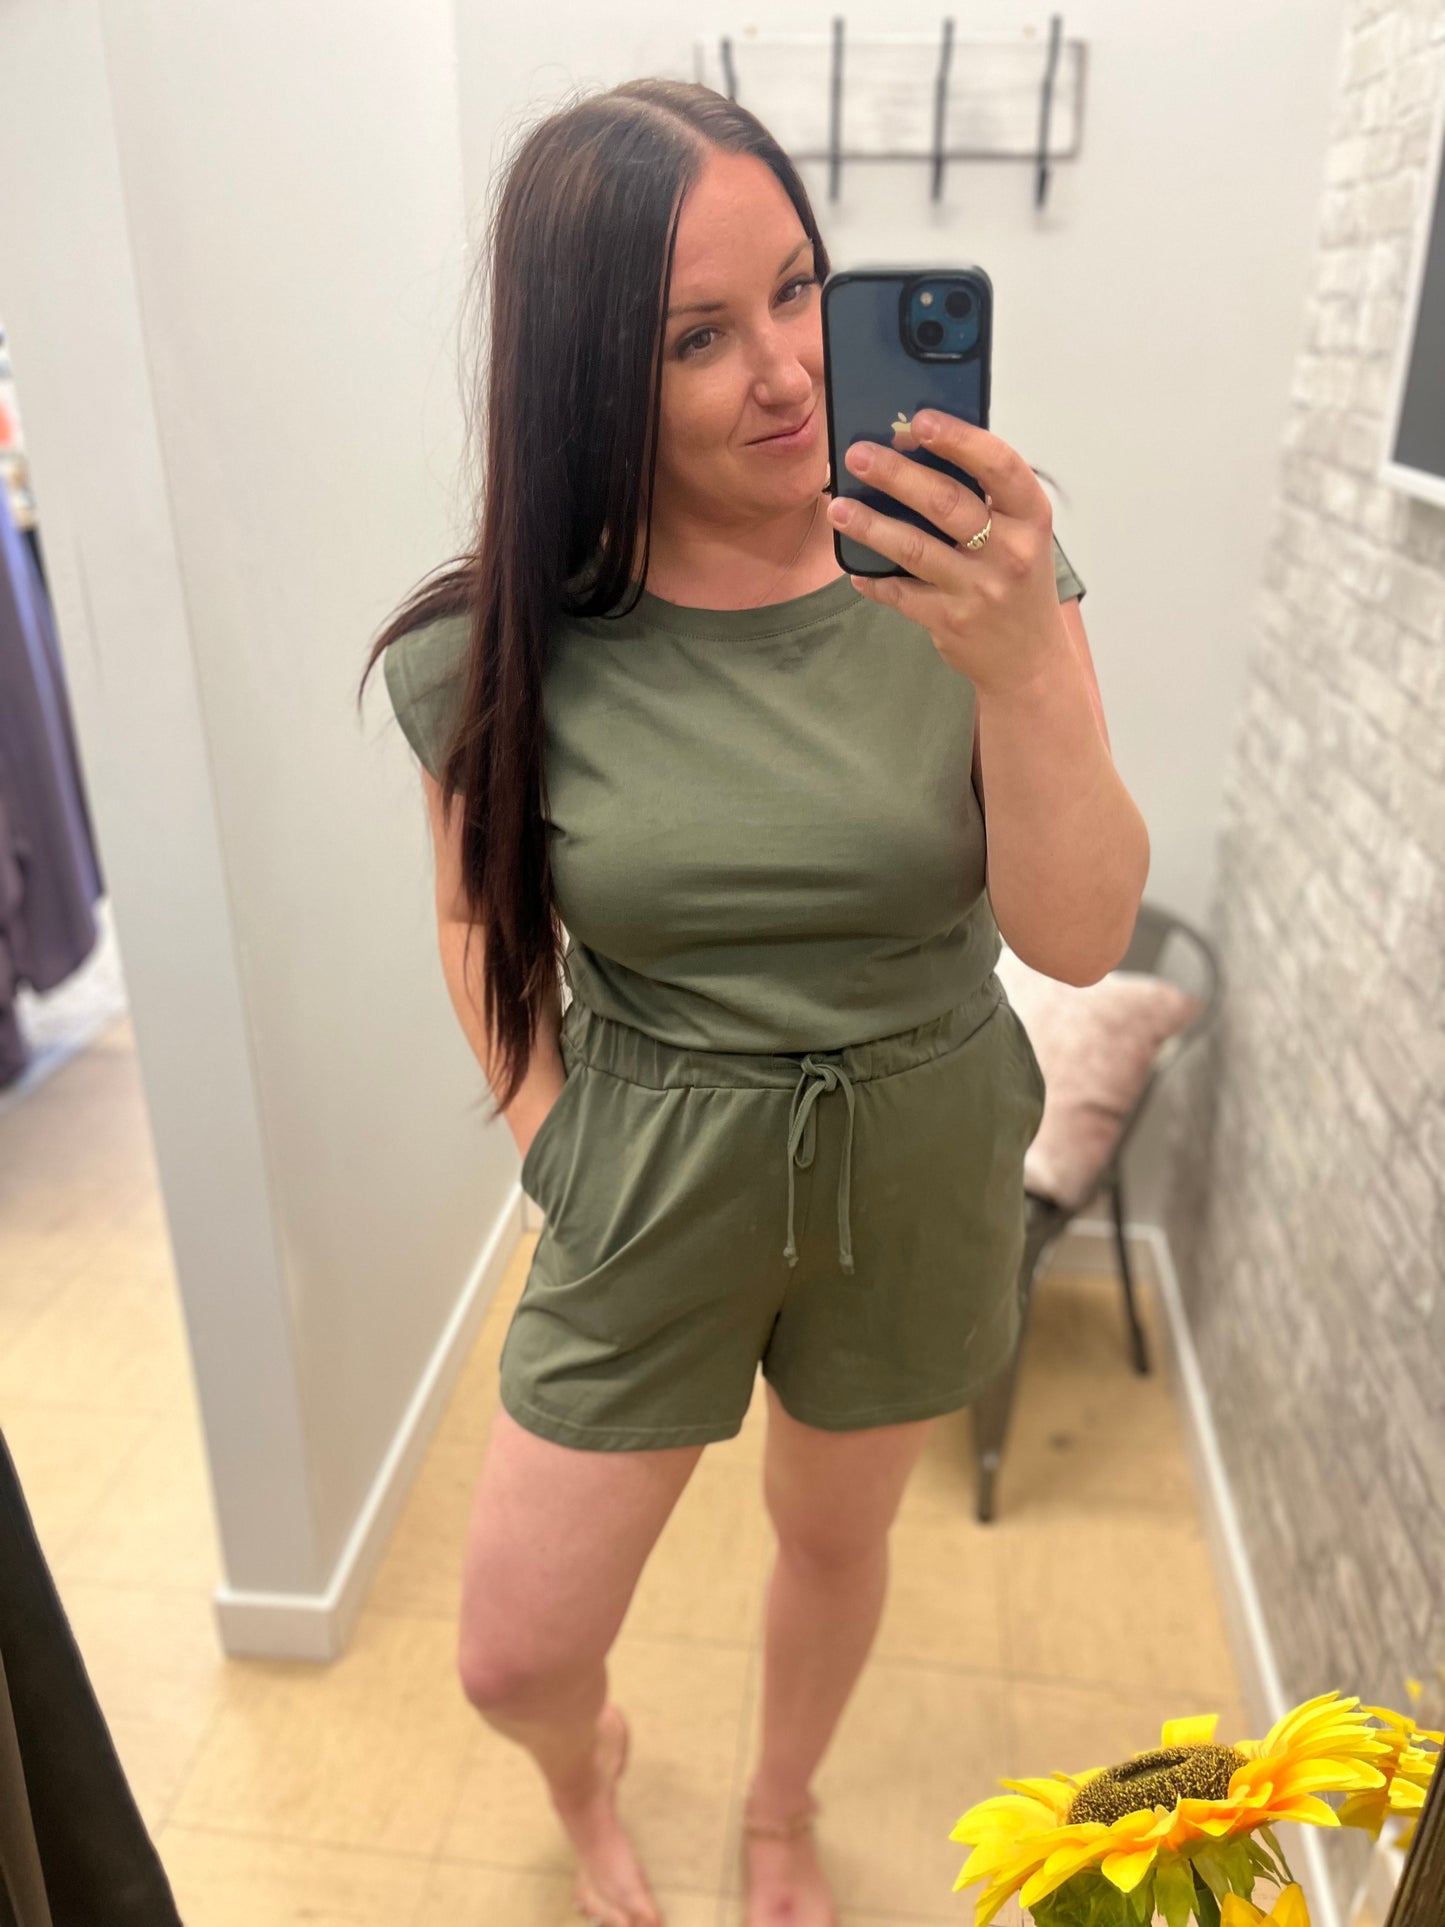 The Olive Shorts Romper